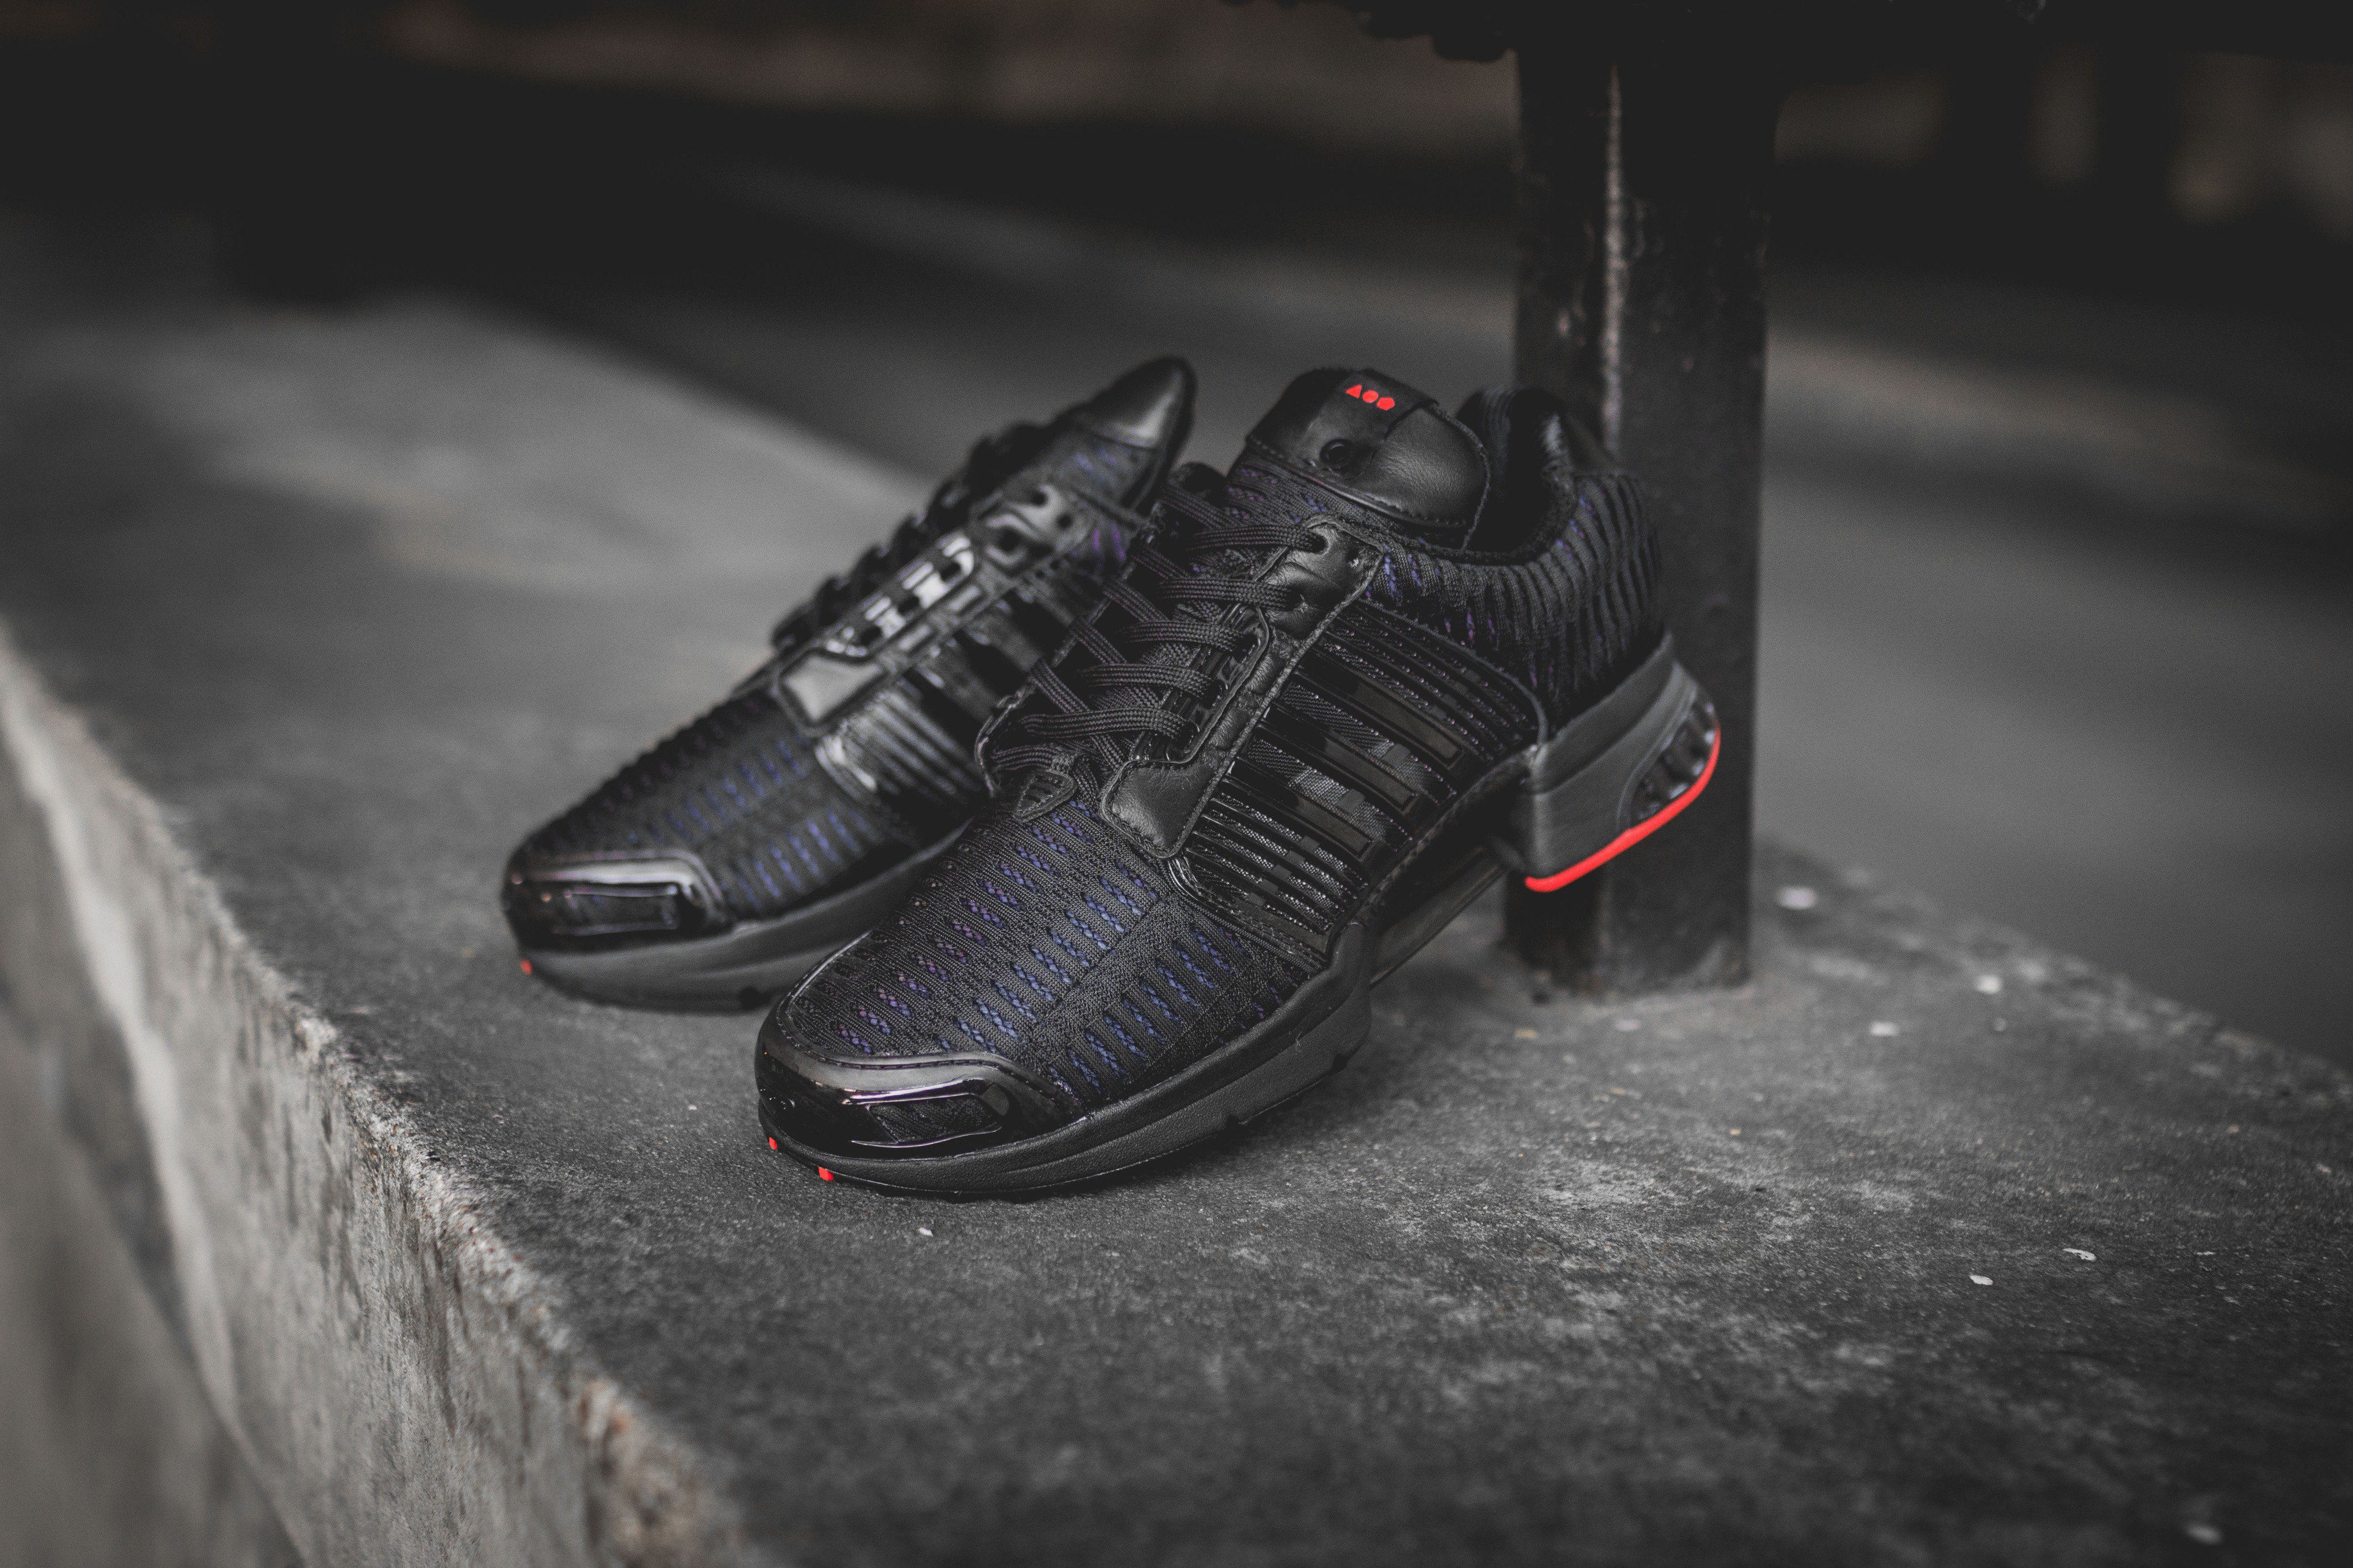 HANON on X: "adidas Climacool x Shoe Gallery "Flight 305" is available to buy ONLINE now! #hanon #adidas #shoegallery https://t.co/hVBypEyFAG https://t.co/6vKlA9f1p8" X